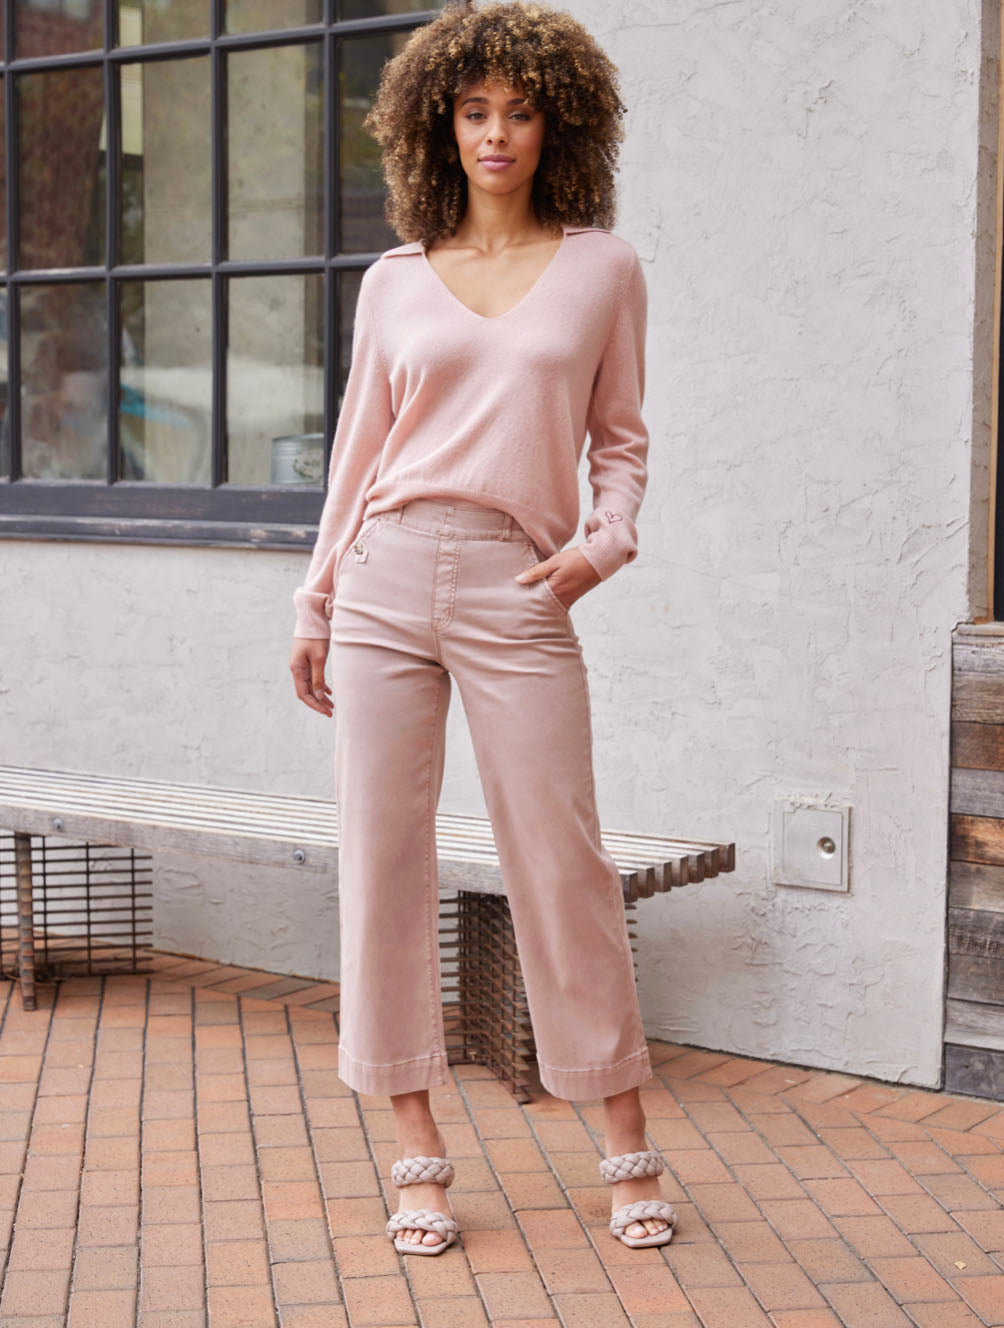 Spanx Stretch Twill Cropped Wide Leg Pant in Mauve